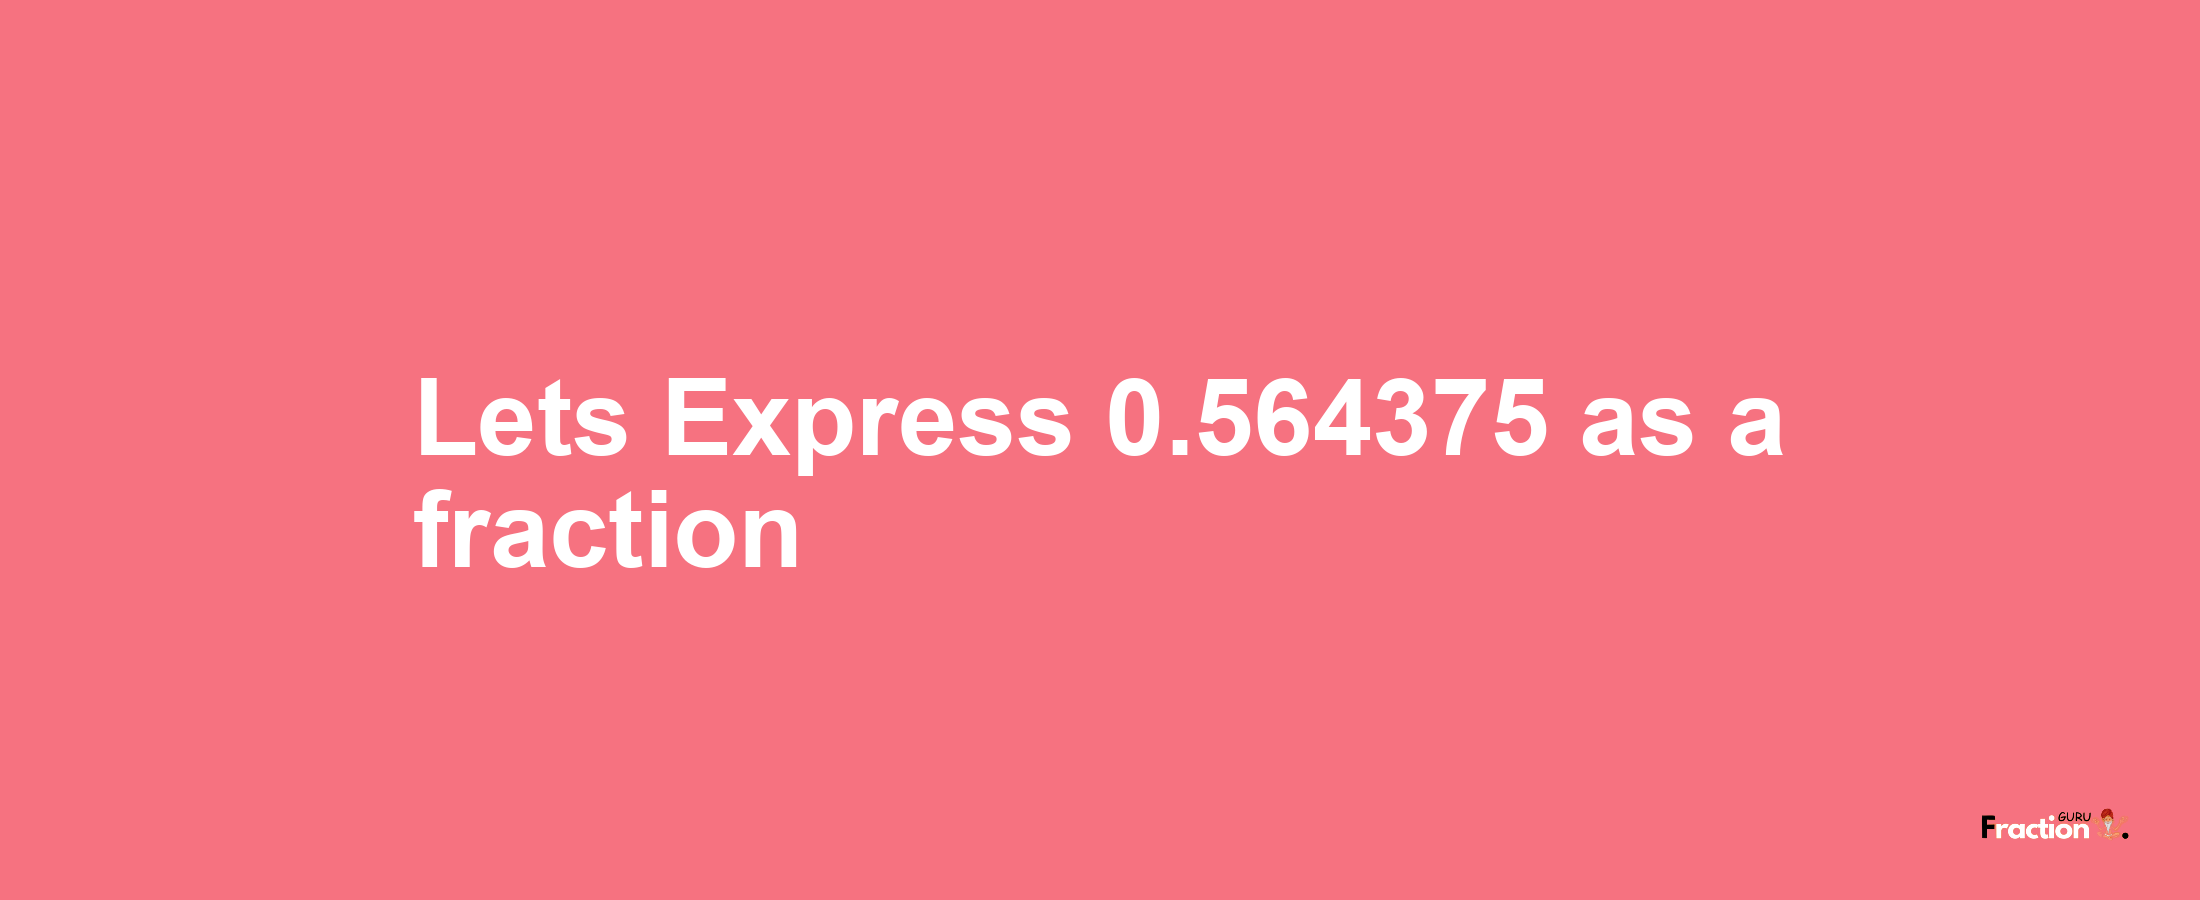 Lets Express 0.564375 as afraction